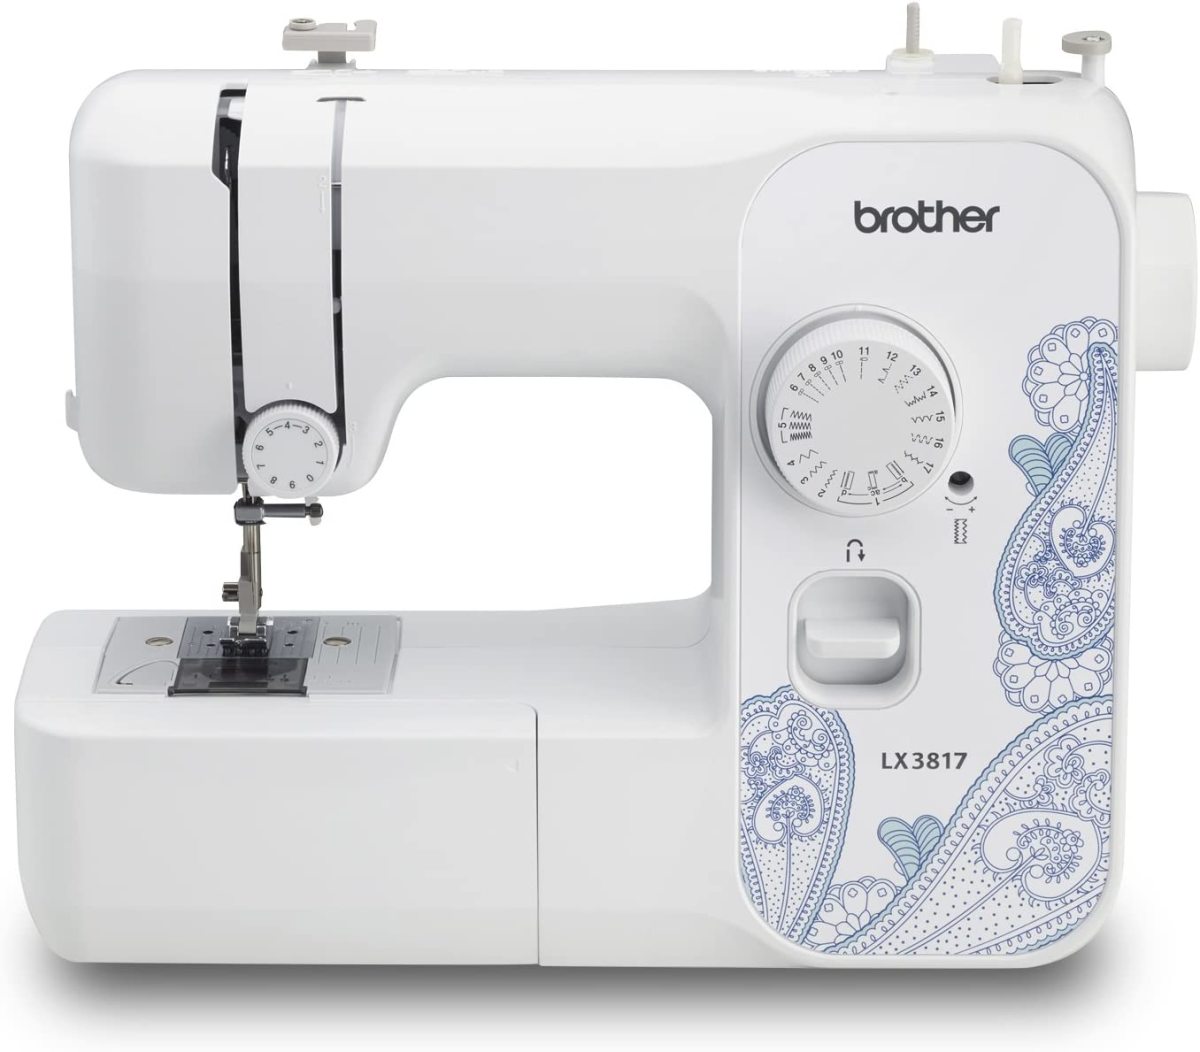 The Brother LX3817 is great for beginners.